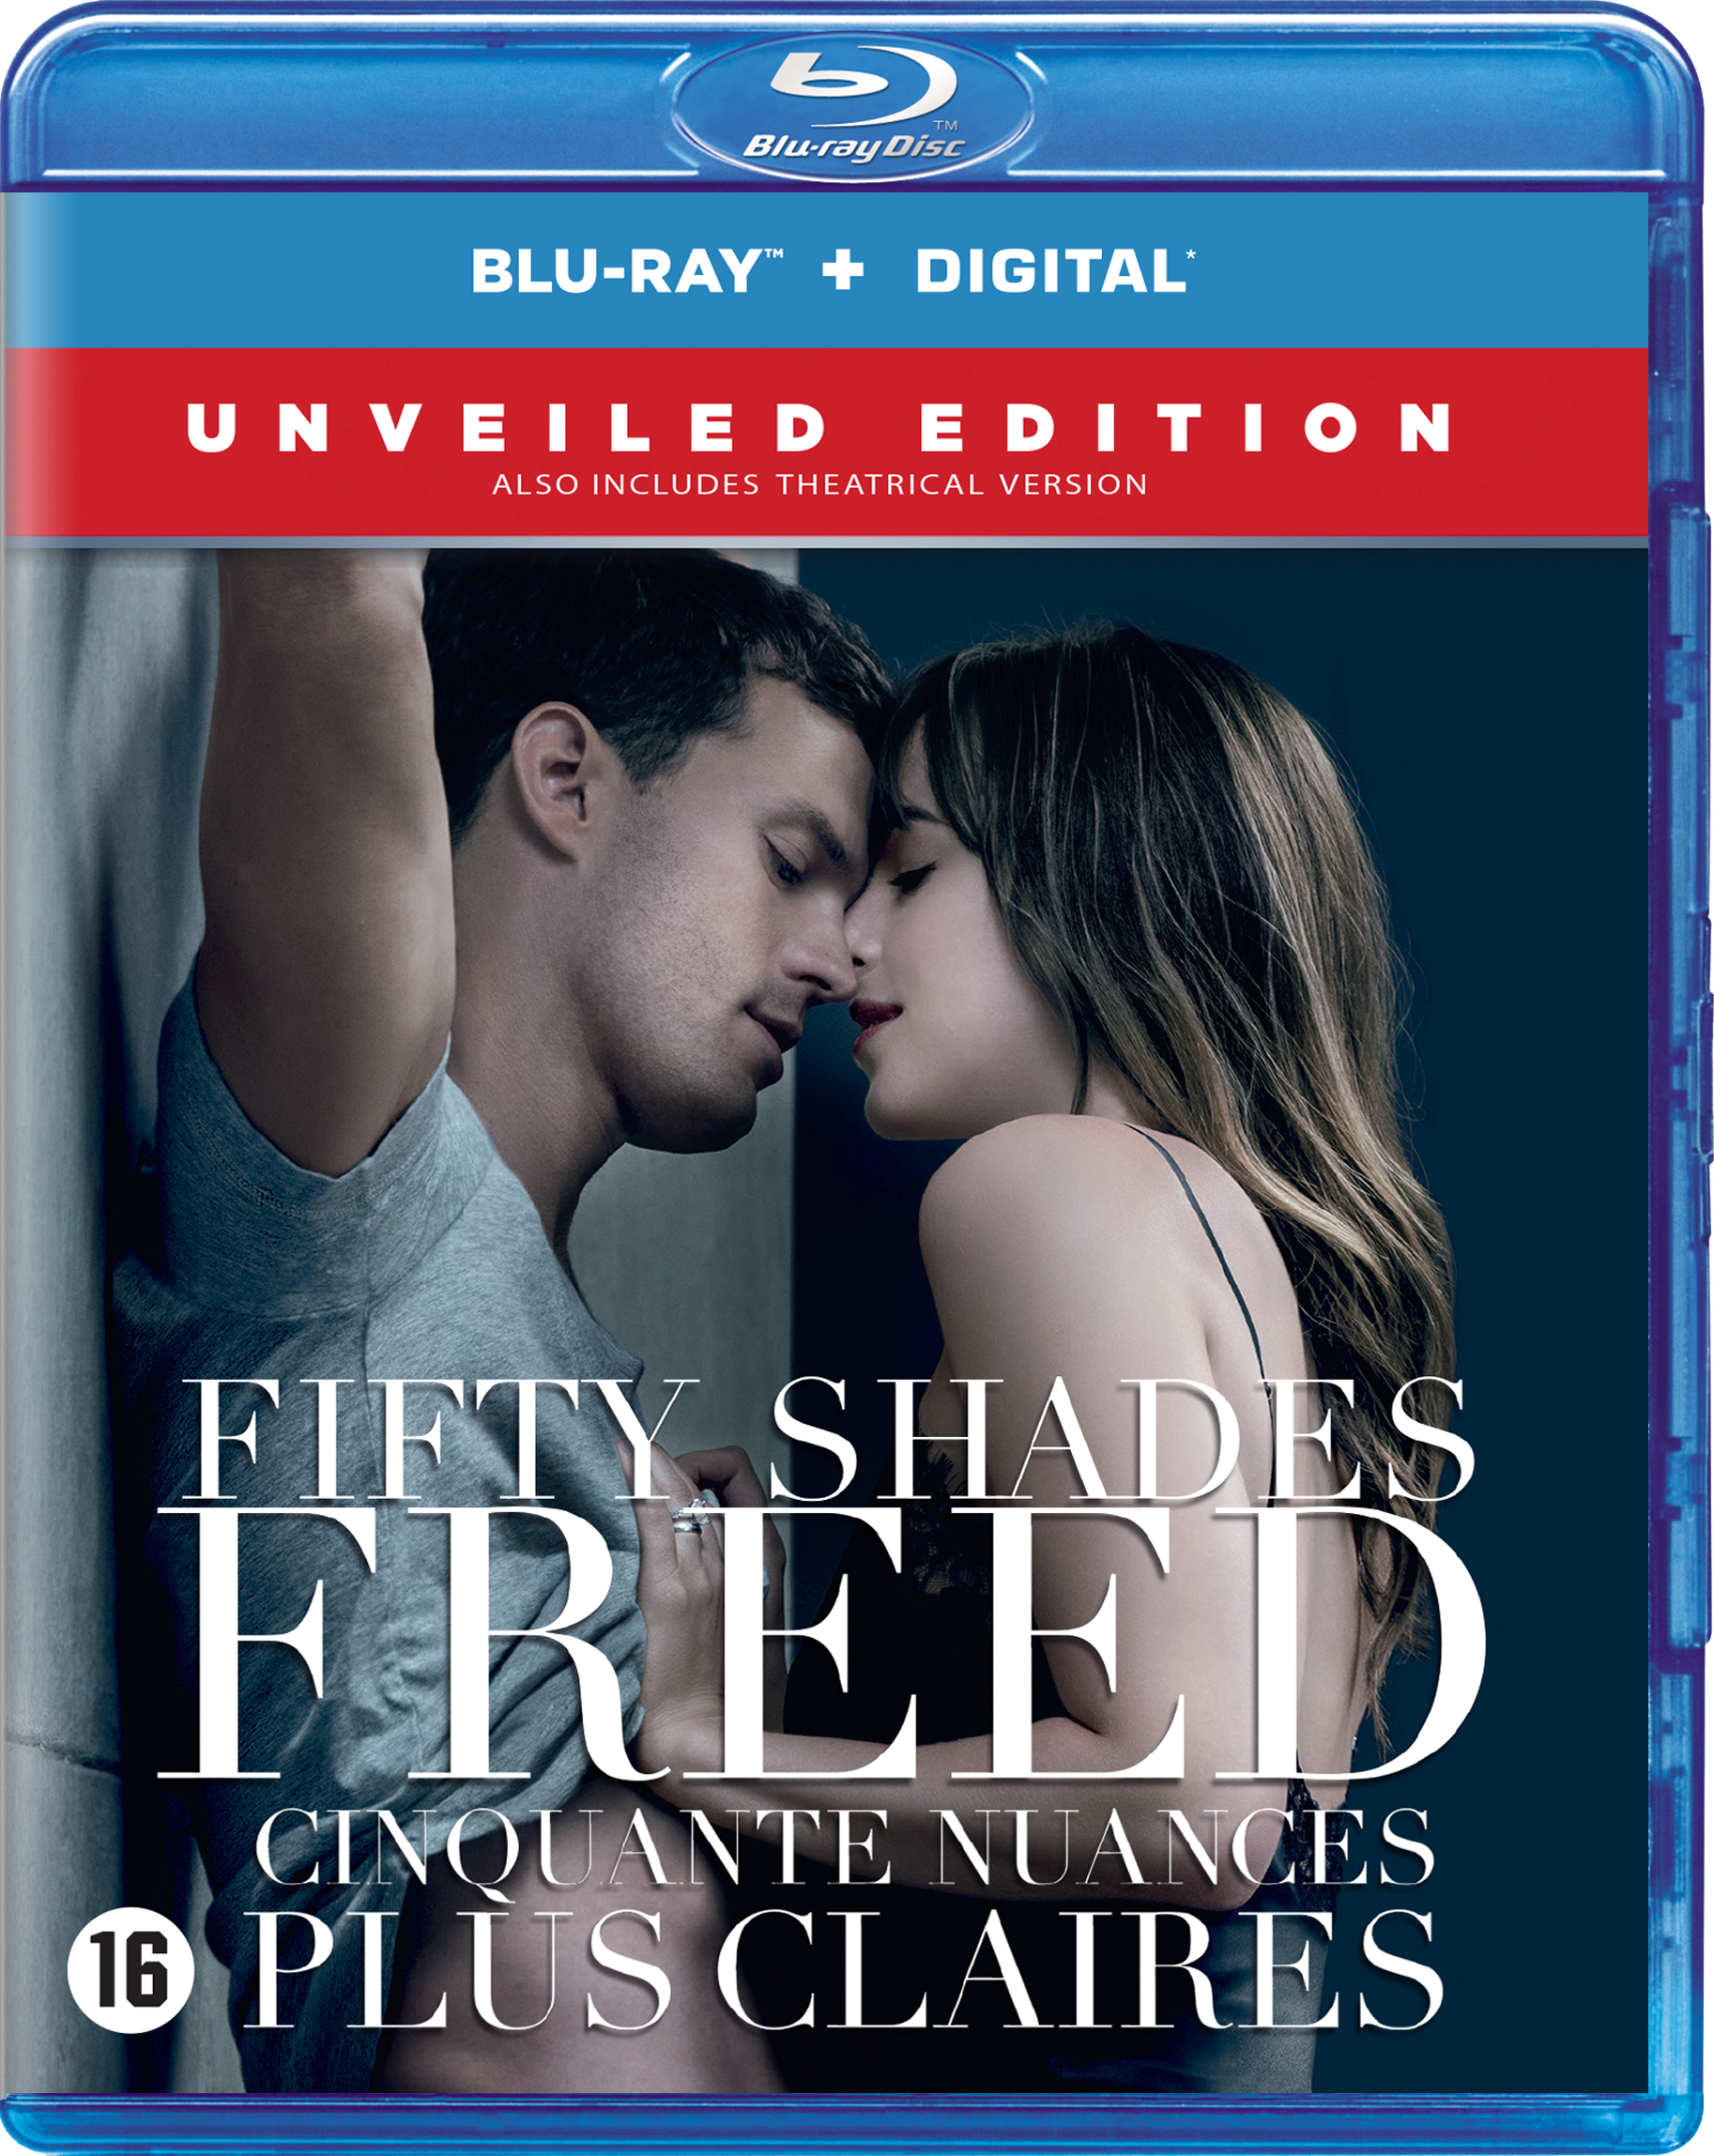 Cinquante Nuances Plus Claires (Fifty Shades Freed) - Unveiled Edition